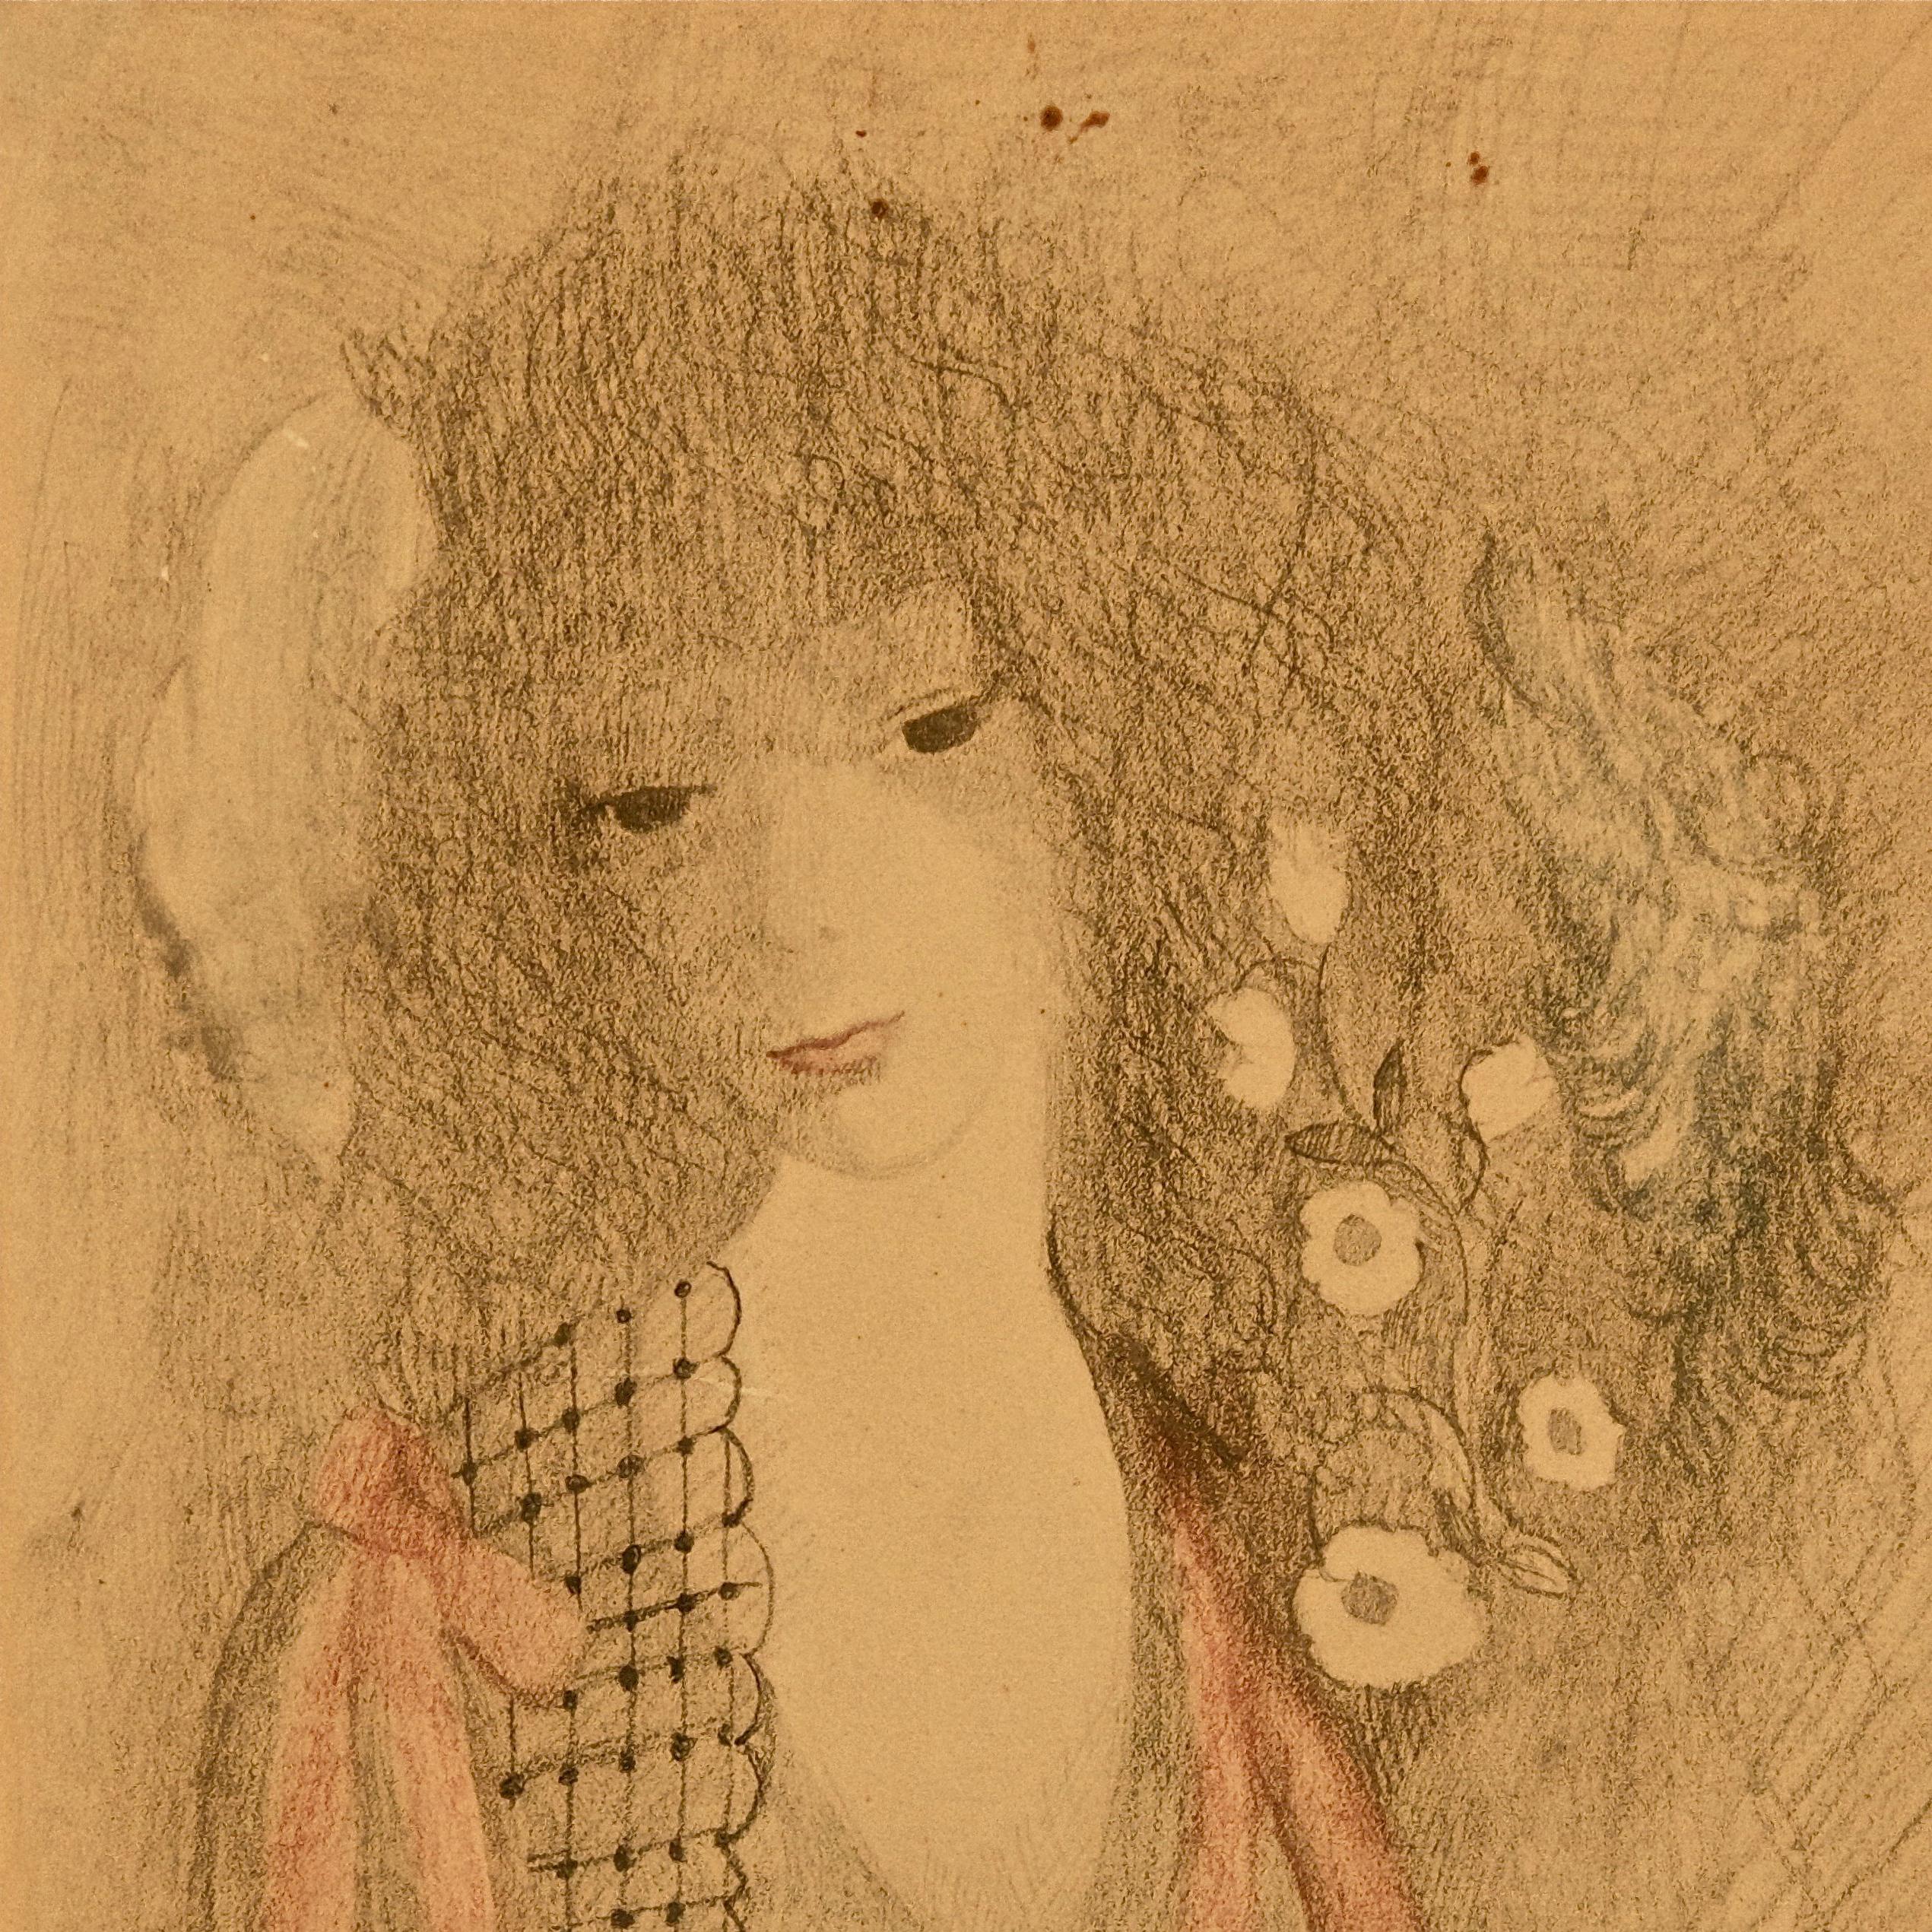 Original china ink, pencil and pastel on paper by Marie Laurencin. Signed lower right.
The work comes from an important european private collection and was bought directly from the artist.
Very good conditions.